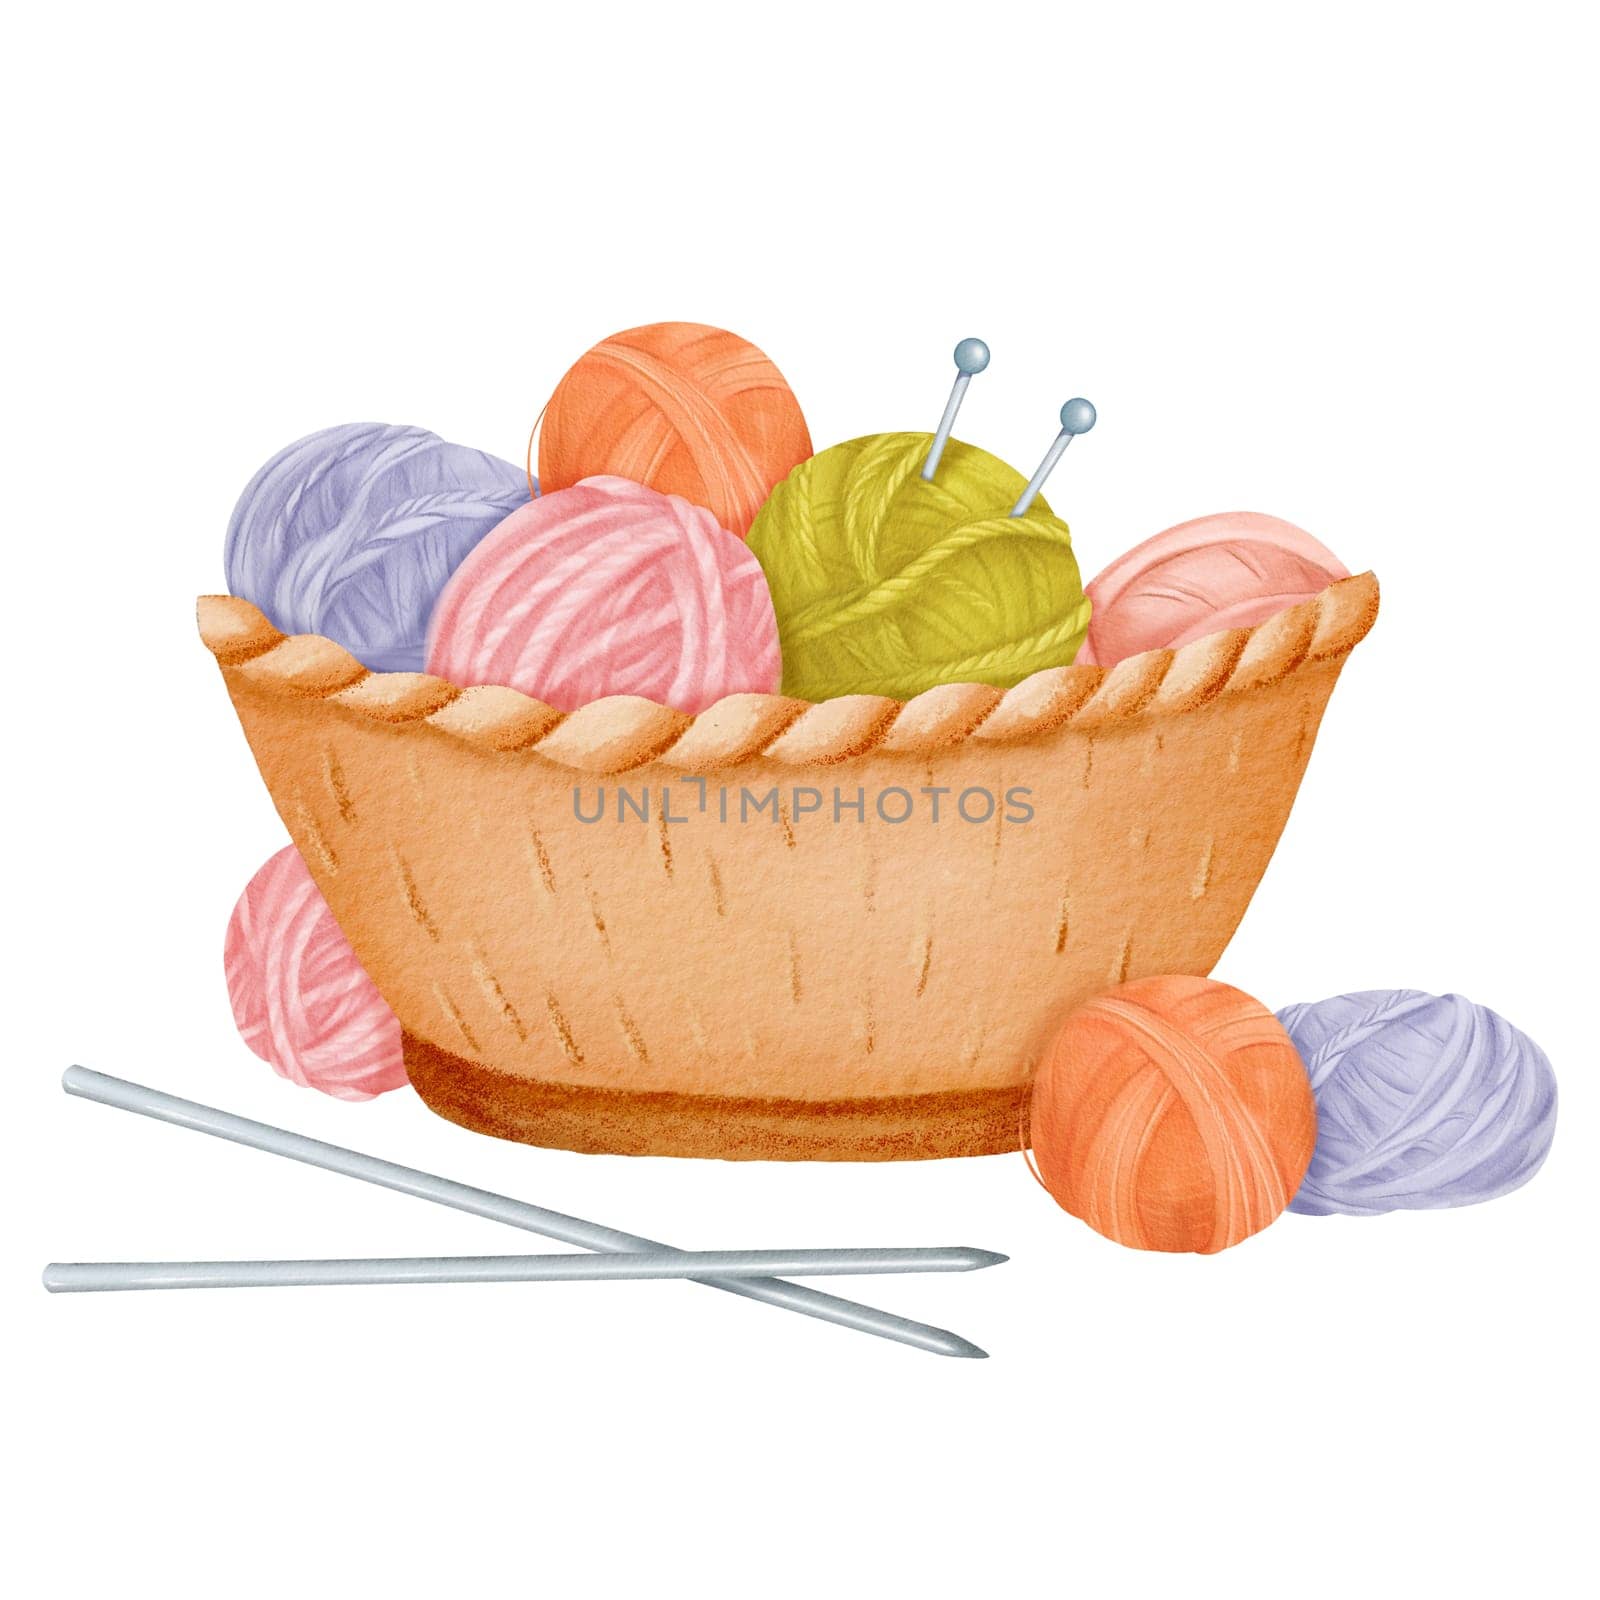 A comfortable setup featuring a woven basket filled with assorted yarn balls and knitting needles. Suitable for crafting websites, cozy home decor themes, or DIY-inspired designs. The watercolor illustration.